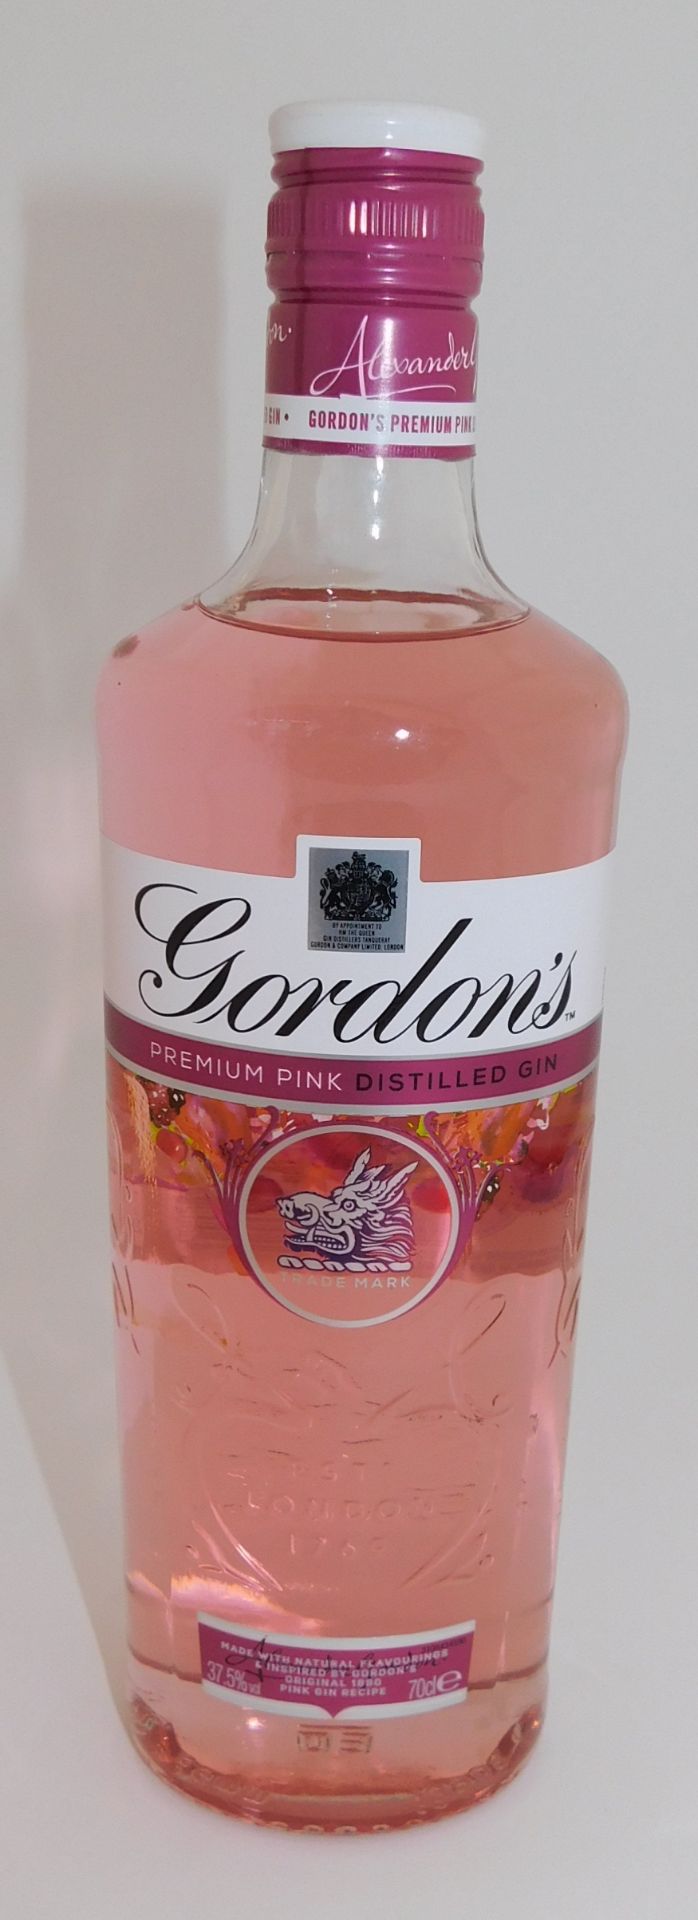 12 Bottles of Gordon’s Premium Pink Distilled Gin, 70cl (Located Stockport – See General Notes for